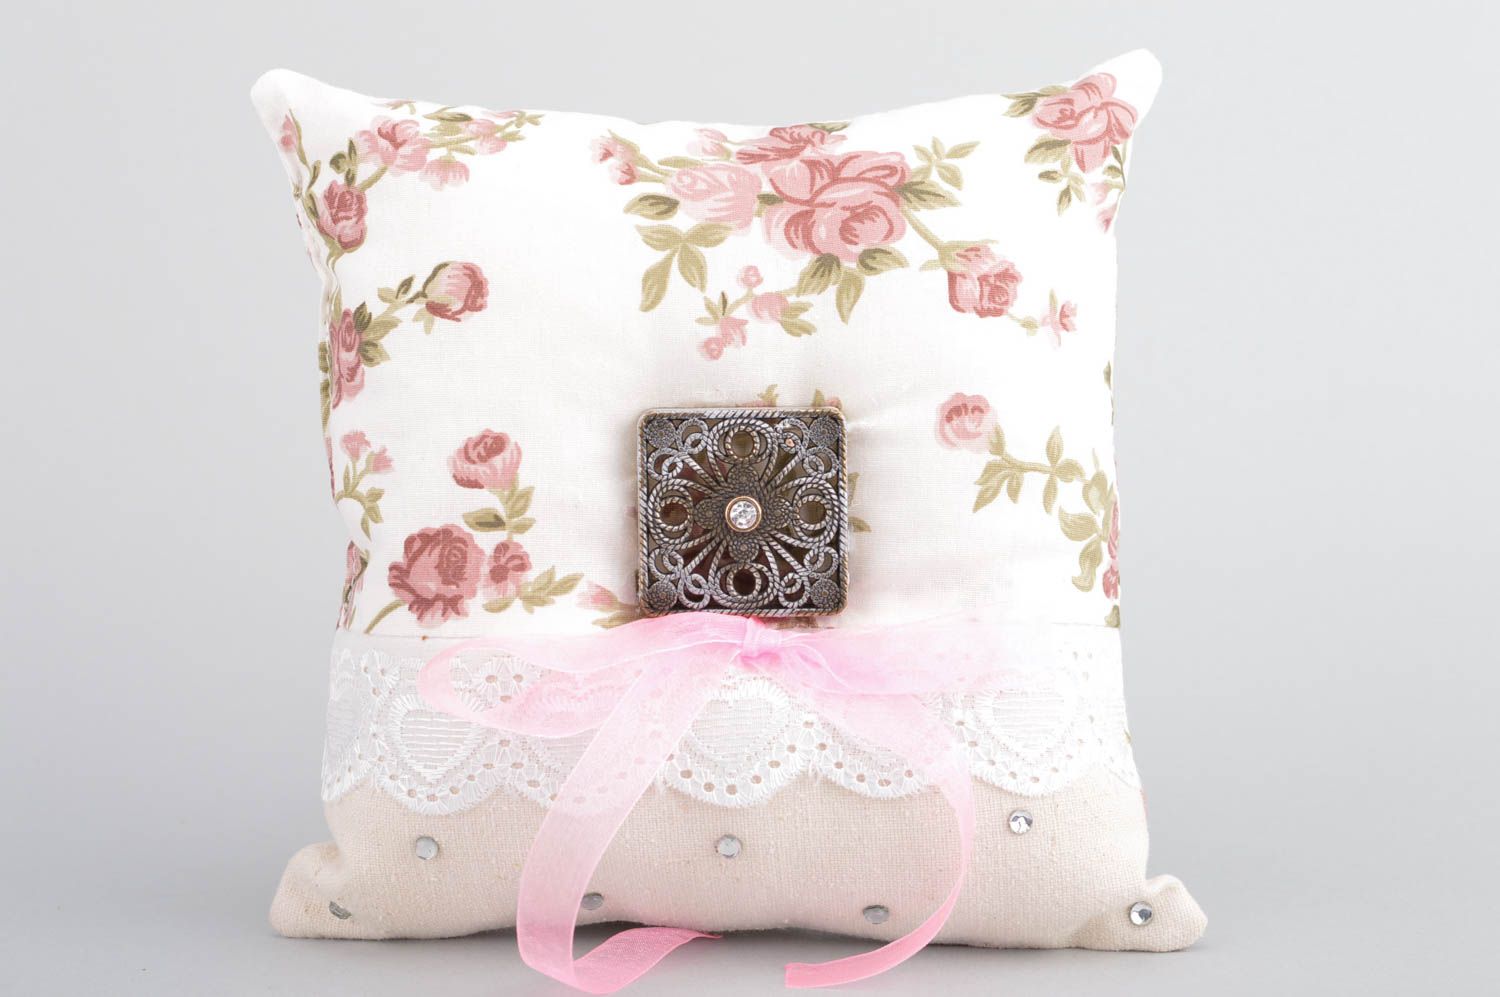 Handmade designer ring bearer pillow sewn of floral cotton fabric with lace photo 2